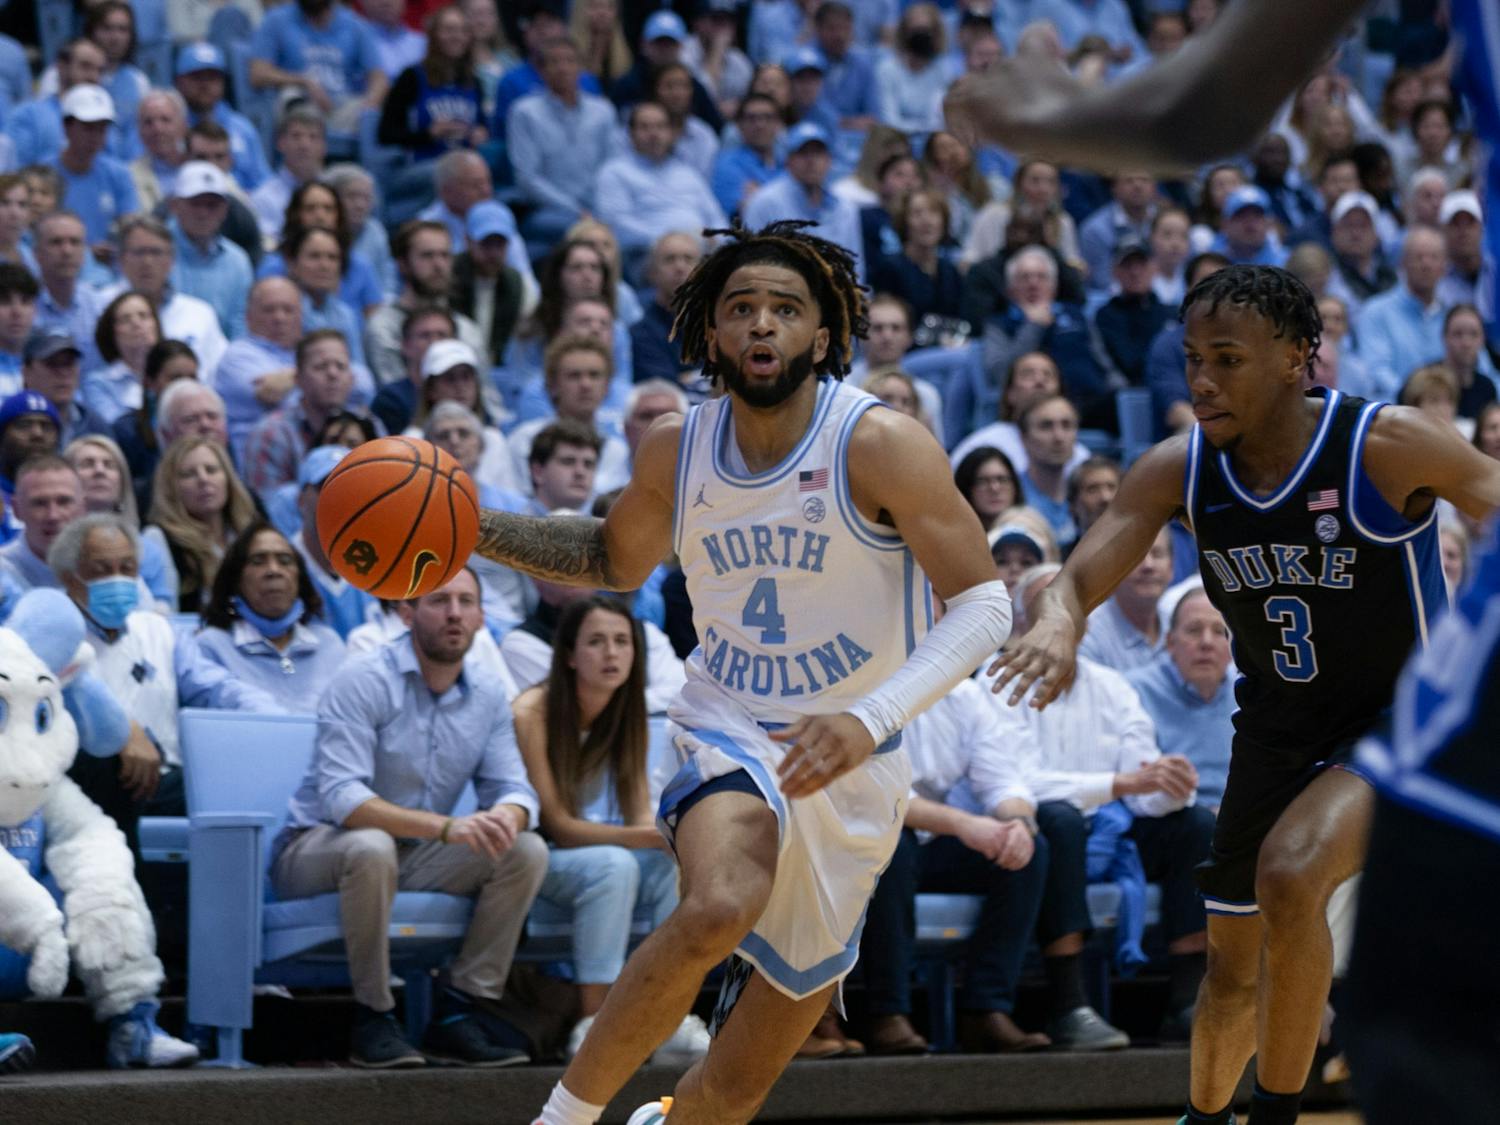 UNC junior guard RJ Davis (4) dribbles the ball during the men's basketball game against Duke on Saturday, March 4, 2023.